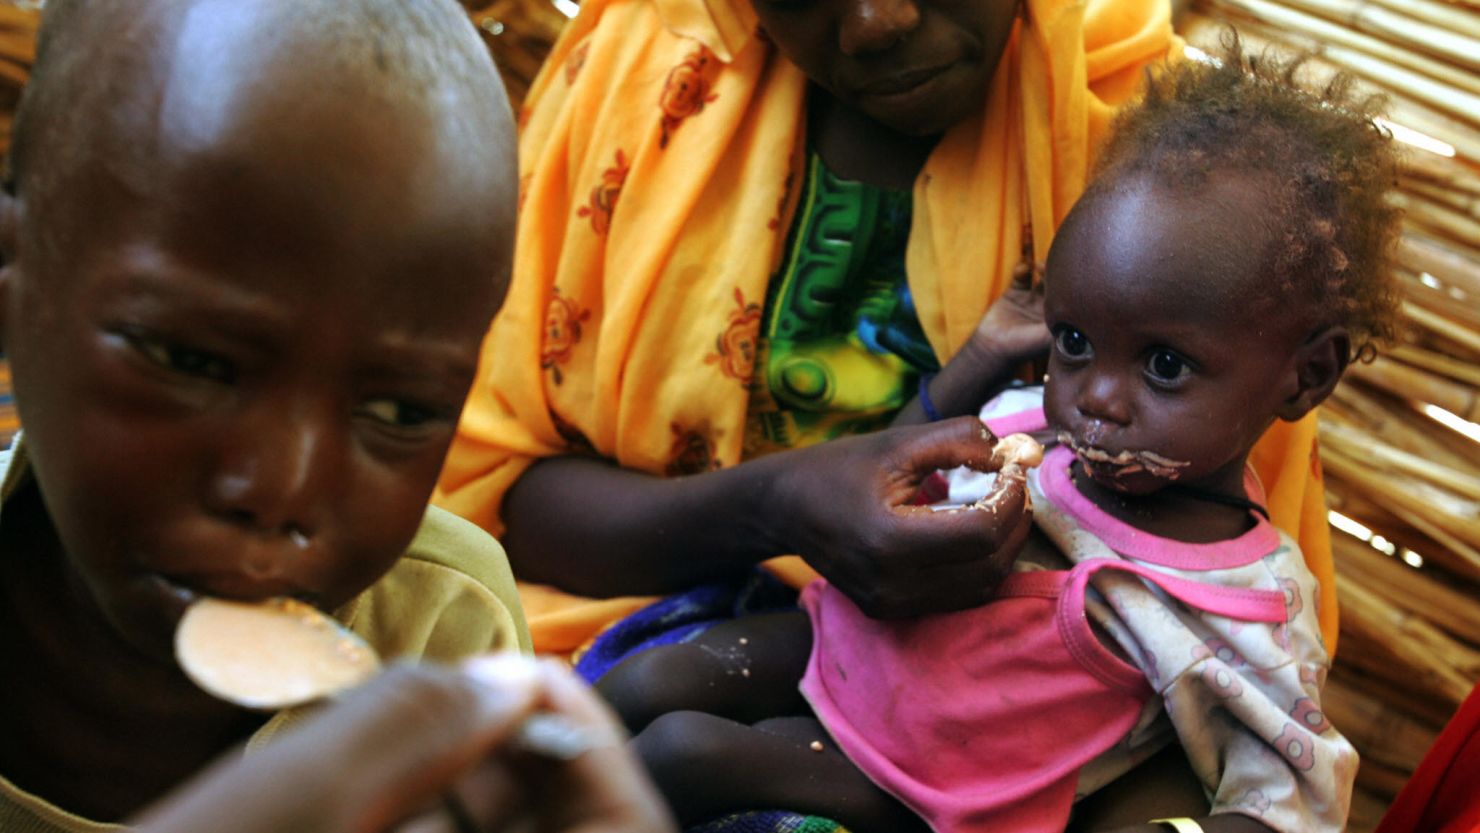 Malnourished Sudanese childre are fed at a camp for people displaced by the war in Darfur in June, 2004.